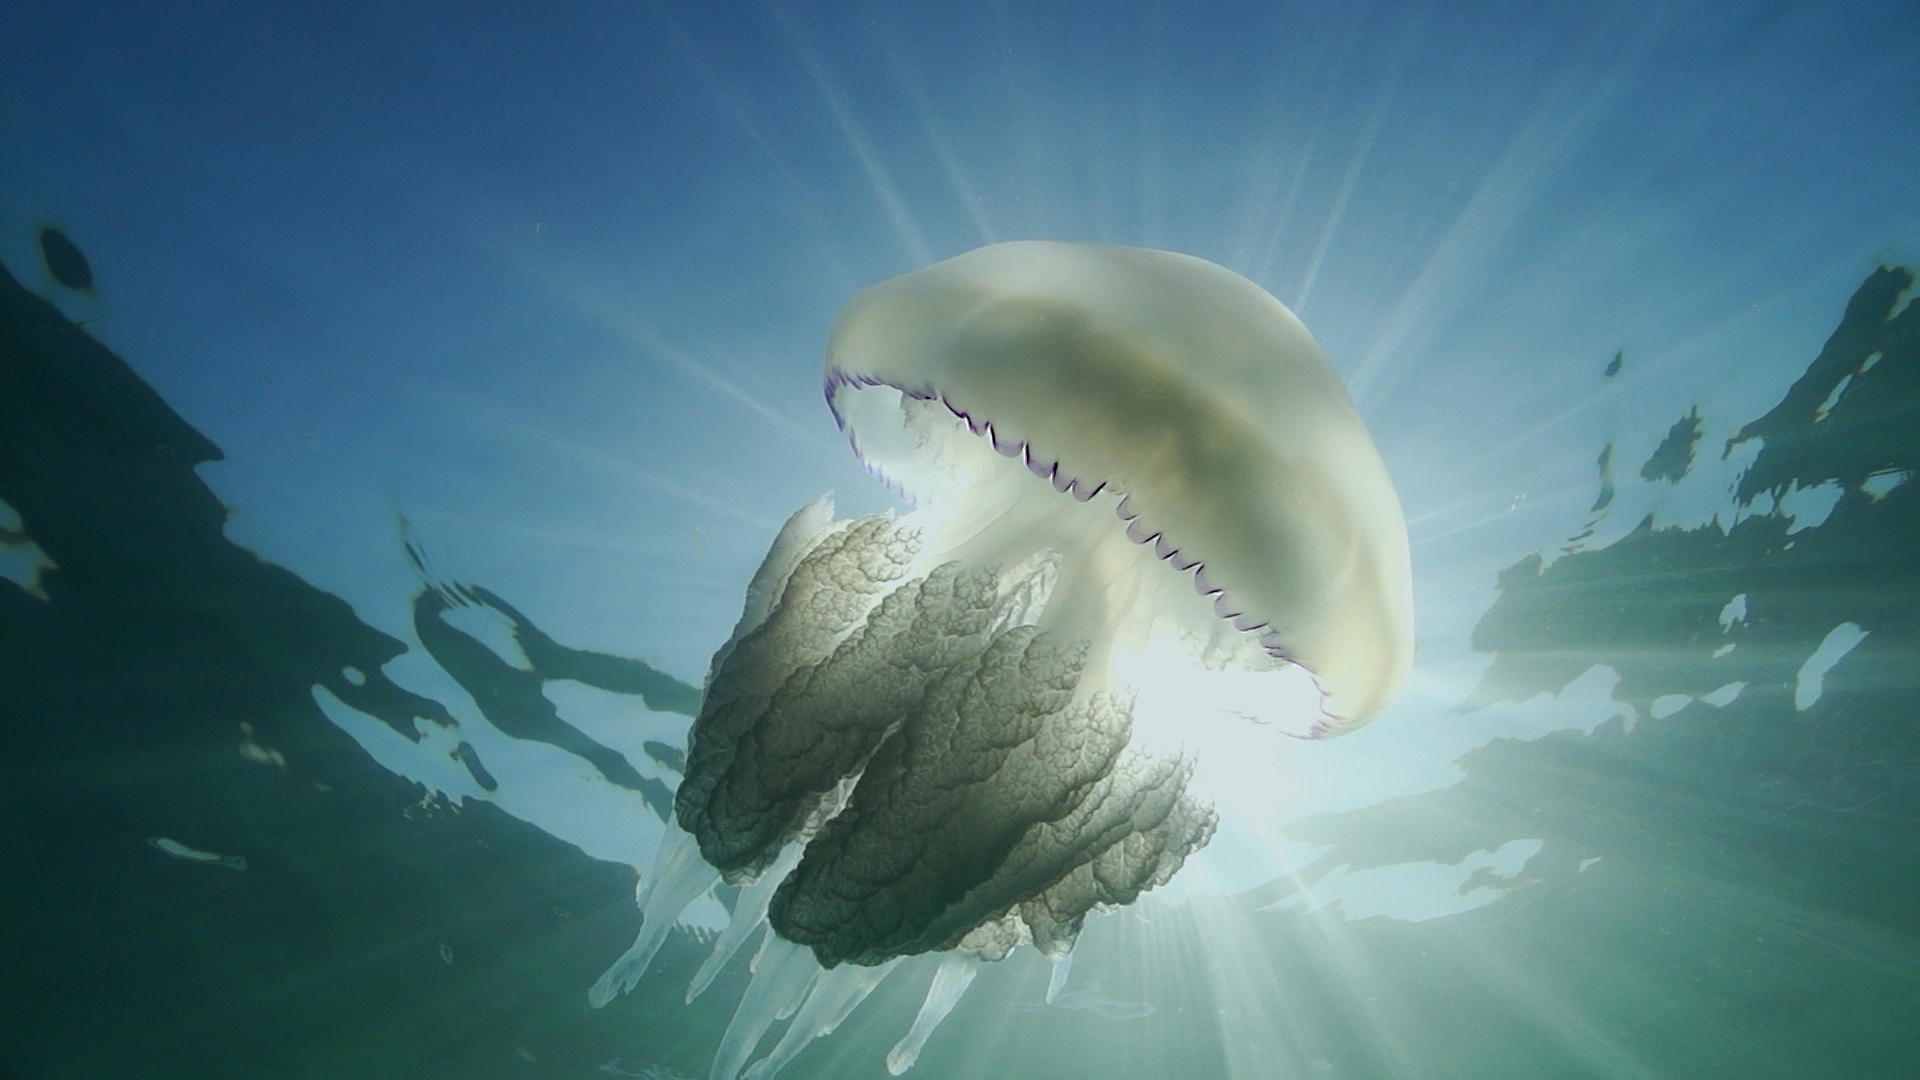 A jellyfish swimming with the sun shining as a spotlight through the water